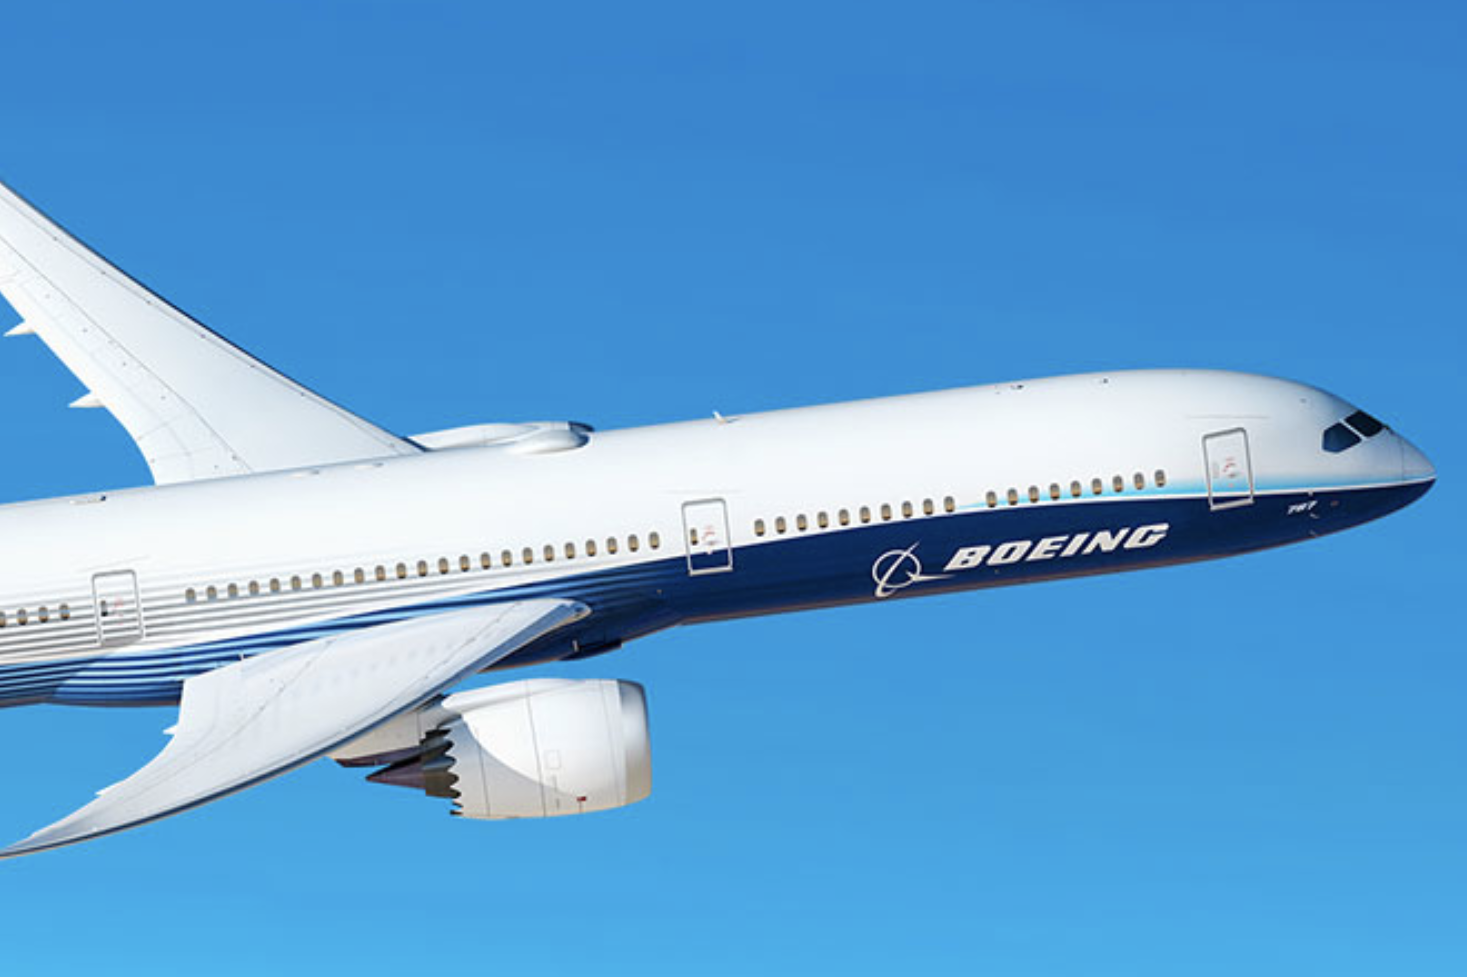 Boeing delivered more 787 Dreamliners last year than the prior year